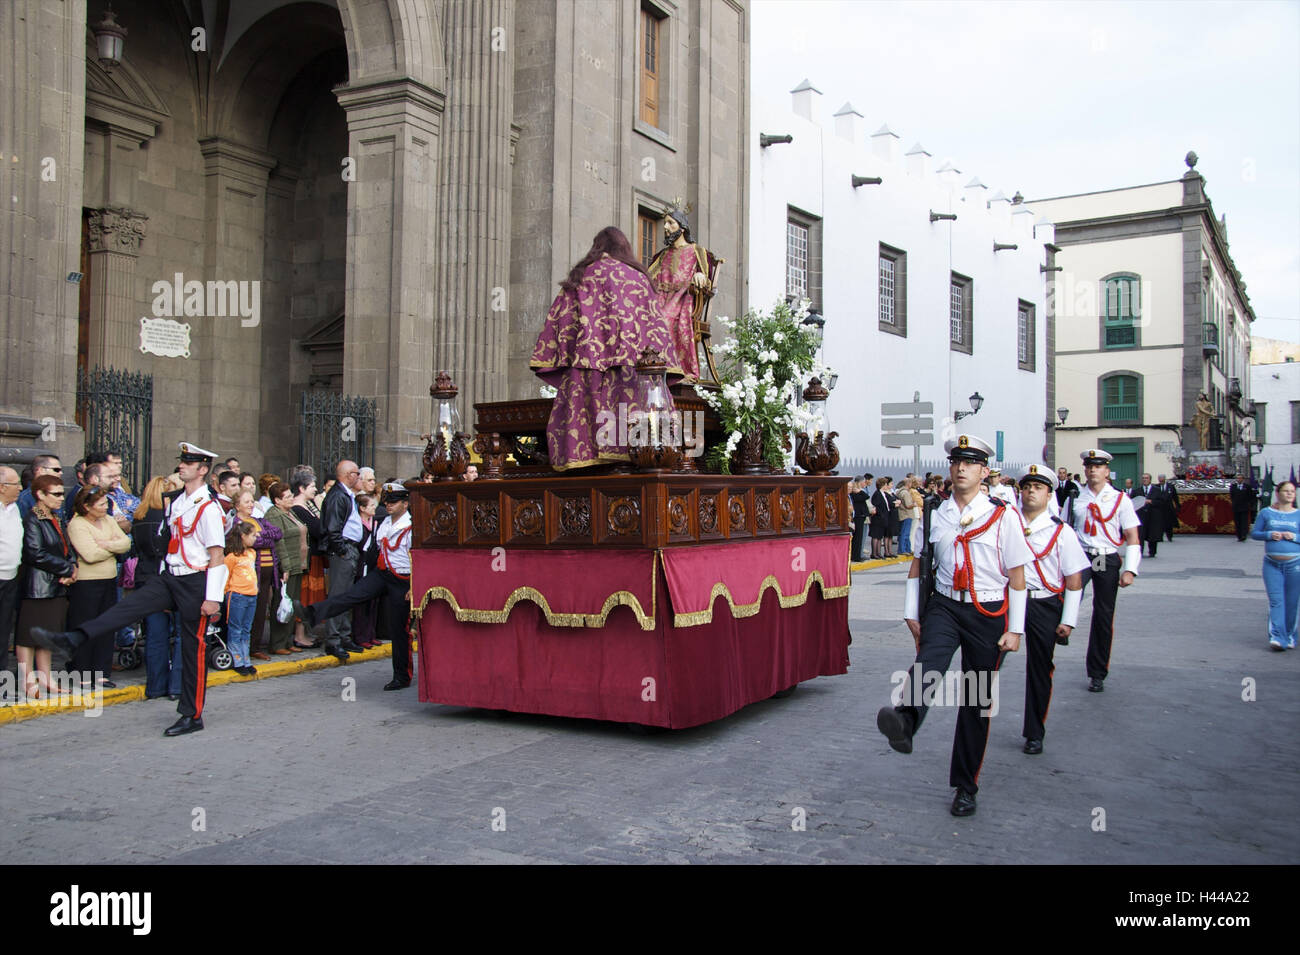 Spain, Canary islands, grain Canaria, Reading Plamas, cathedral Santa Ana, Good Friday procession, soldier, processional carriage, Stock Photo